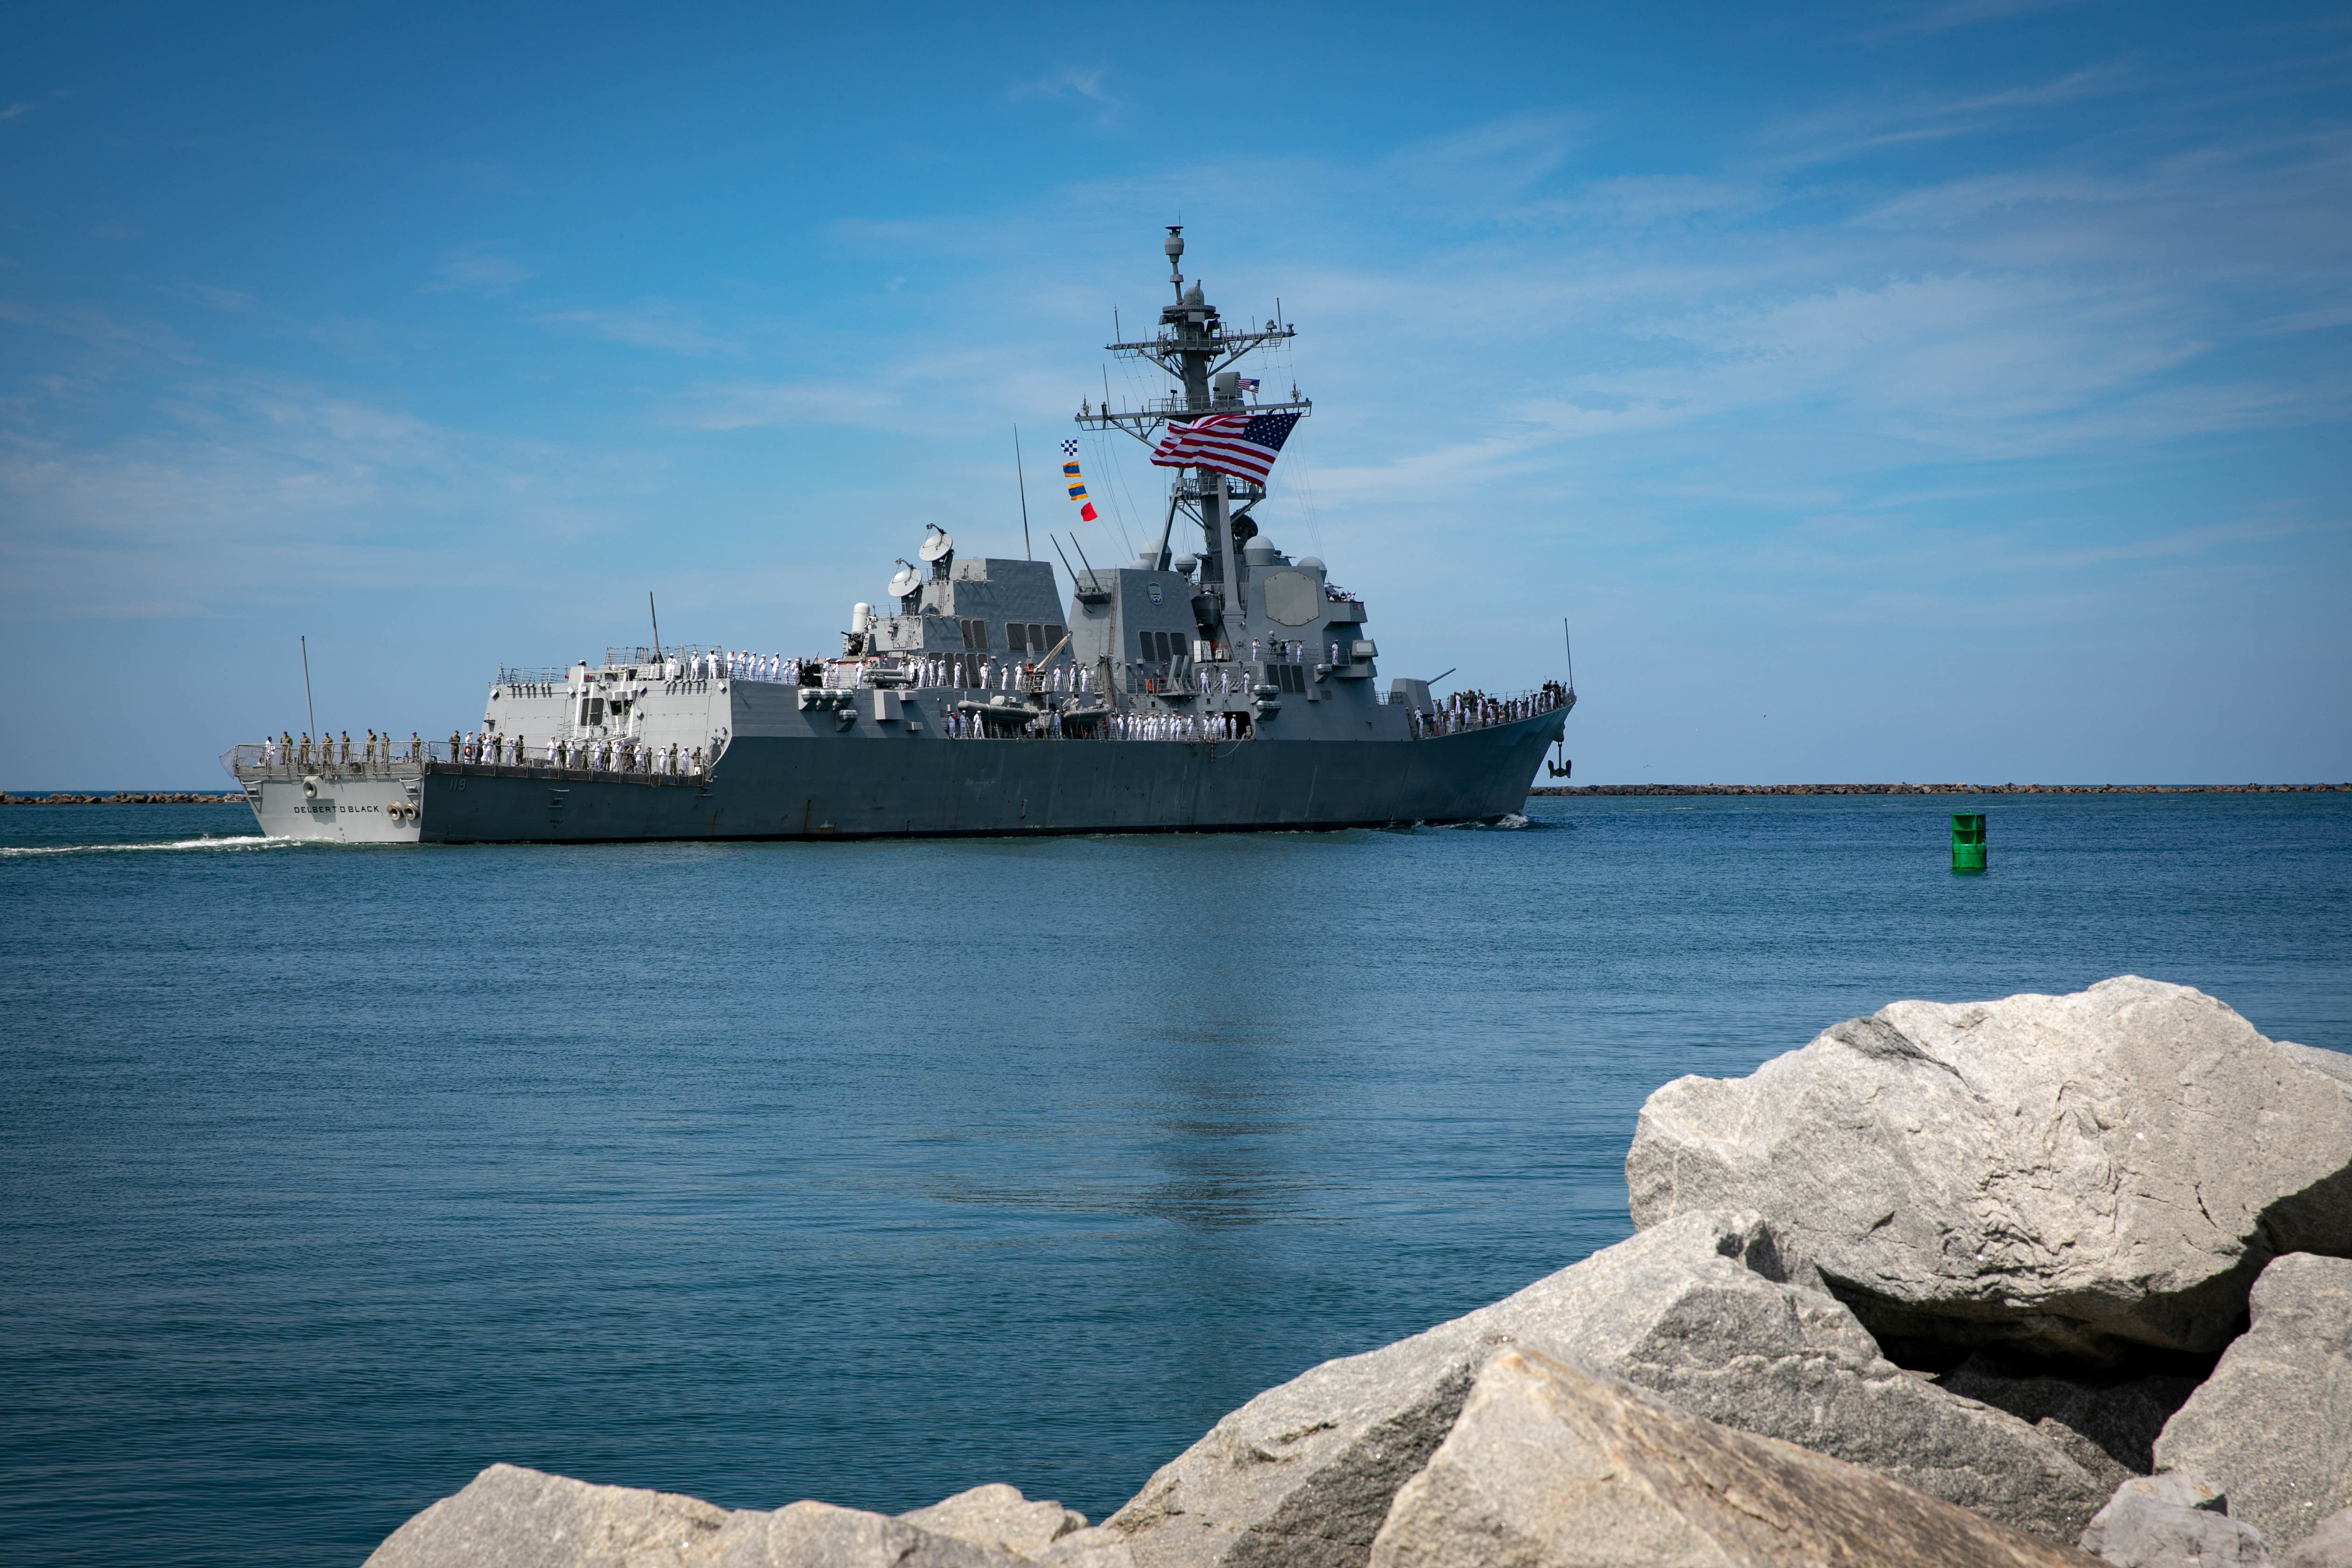 The Arleigh Burke-class guided missile destroyer USS Delbert D. Black (DDG 119) departs Naval Station Mayport for deployment, Aug 2, 2022.